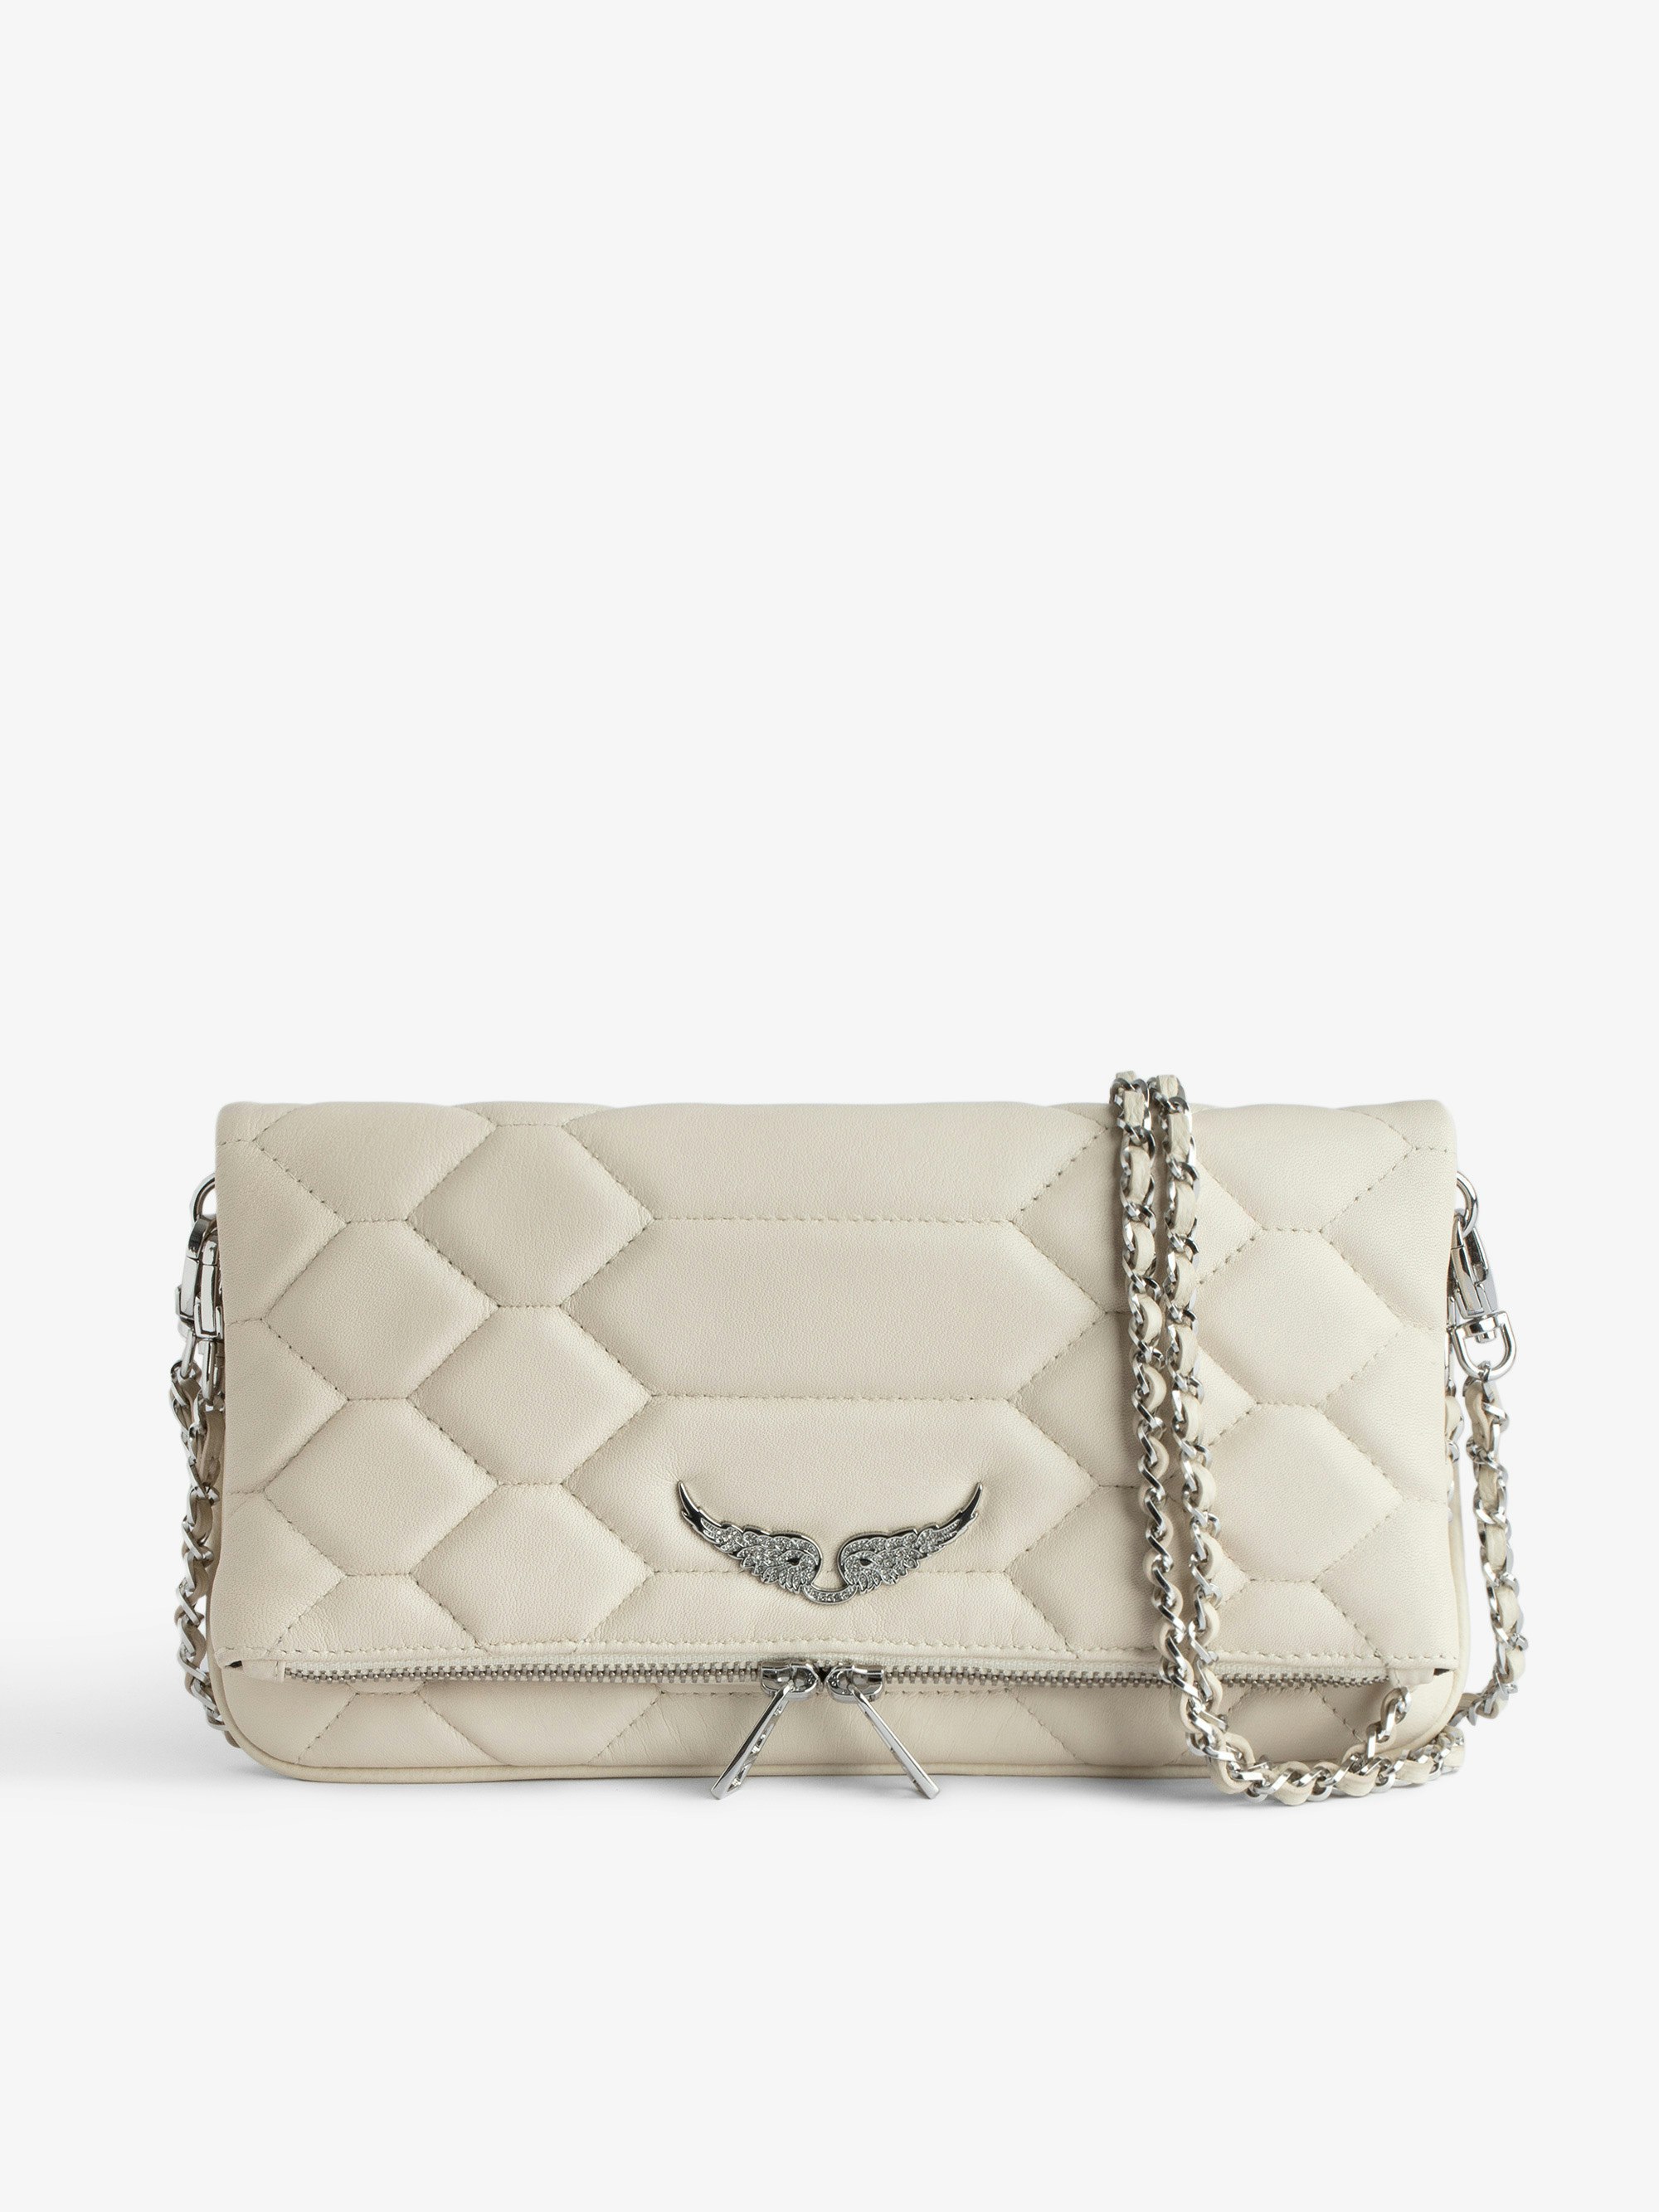 Rock Quilted Clutch - Women’s smooth quilted leather clutch bag with snake scale look in ecru.